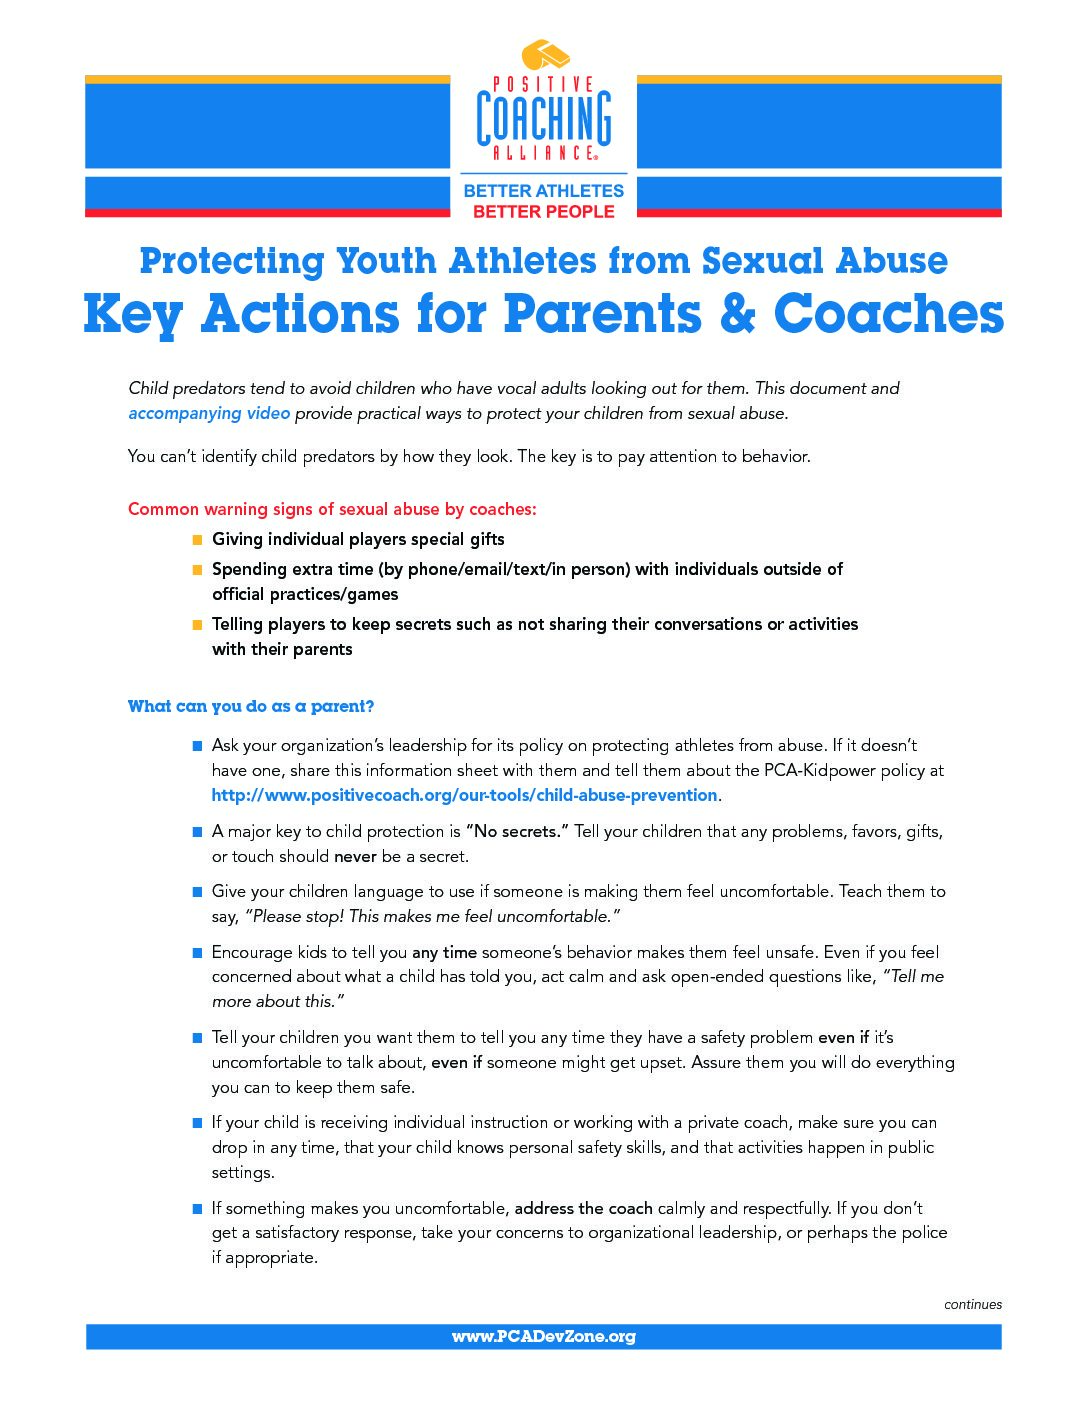 Protecting Youth Athletes - Key Actions for Parents and Coaches (PCA Resource)